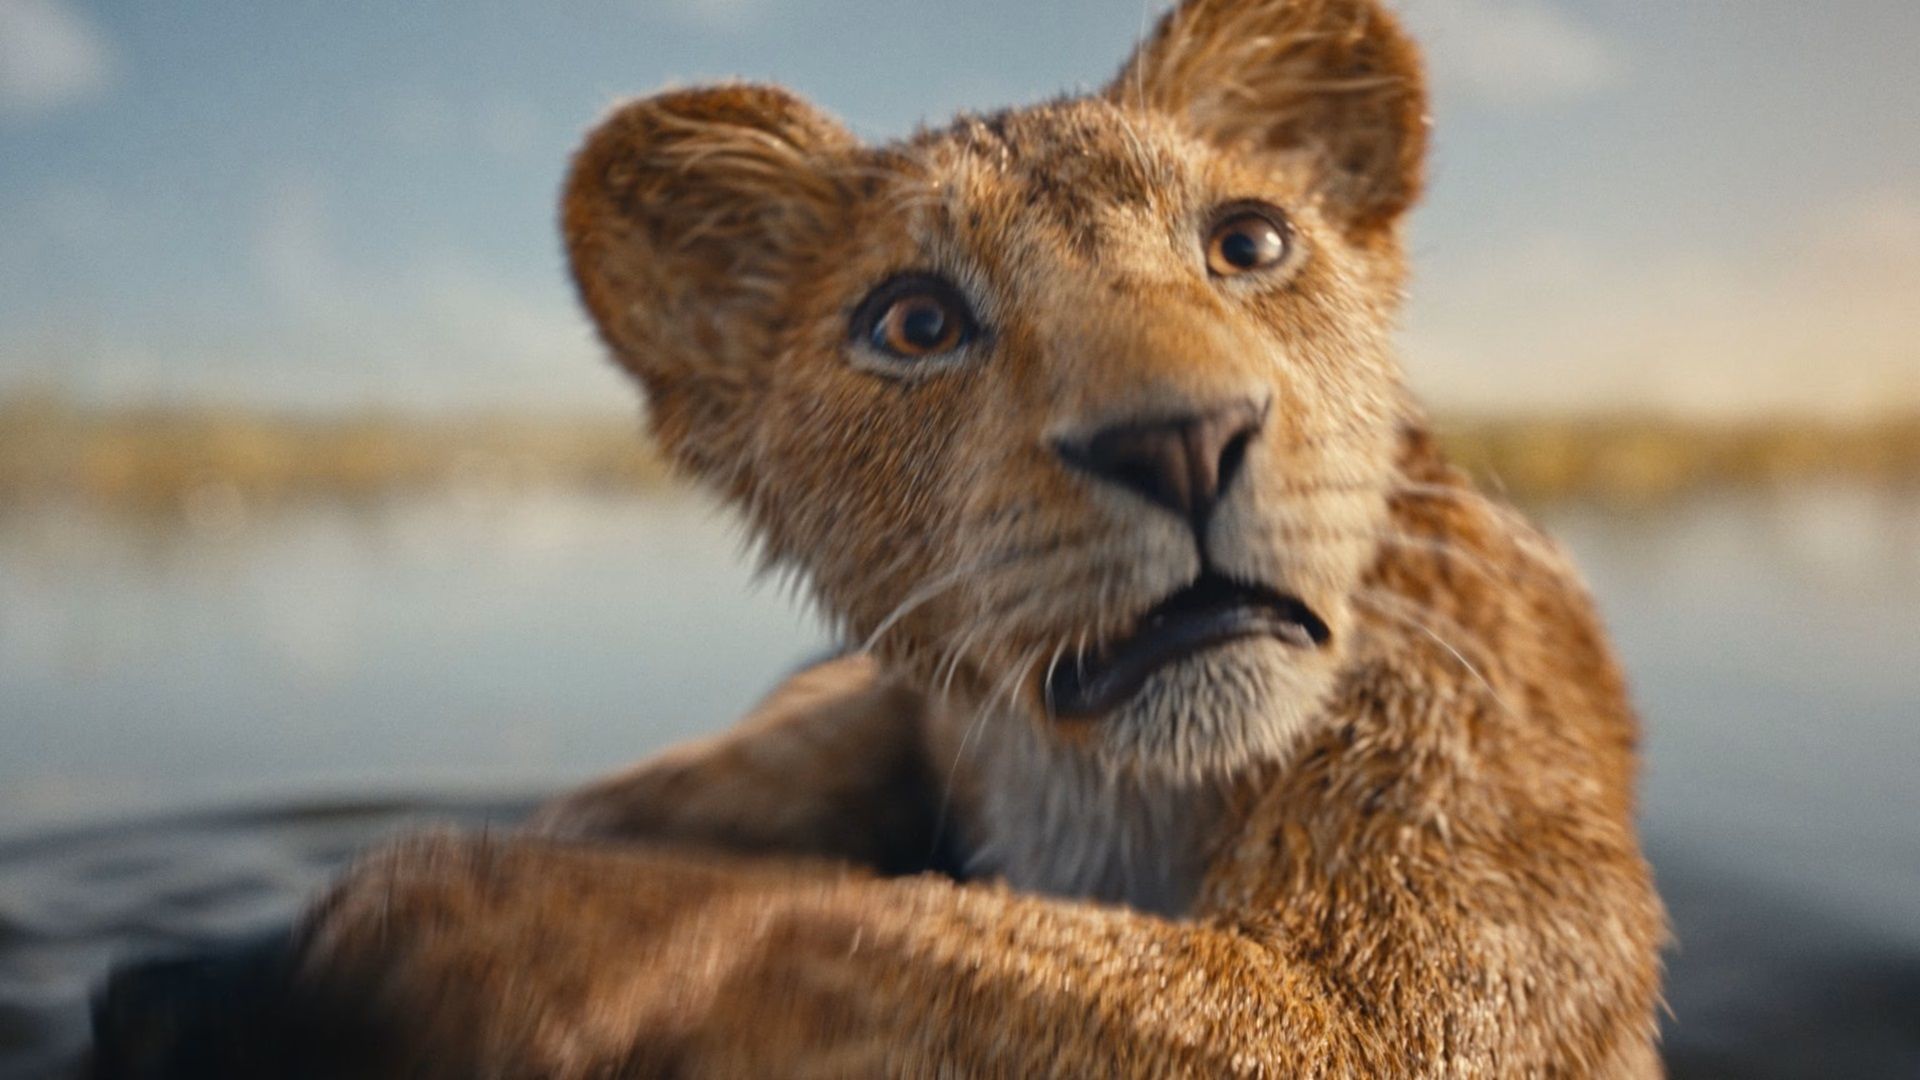 The Lion King Director Reacts to Fans Saying He’s ‘Too Talented’ for ‘Soulless’ Disney